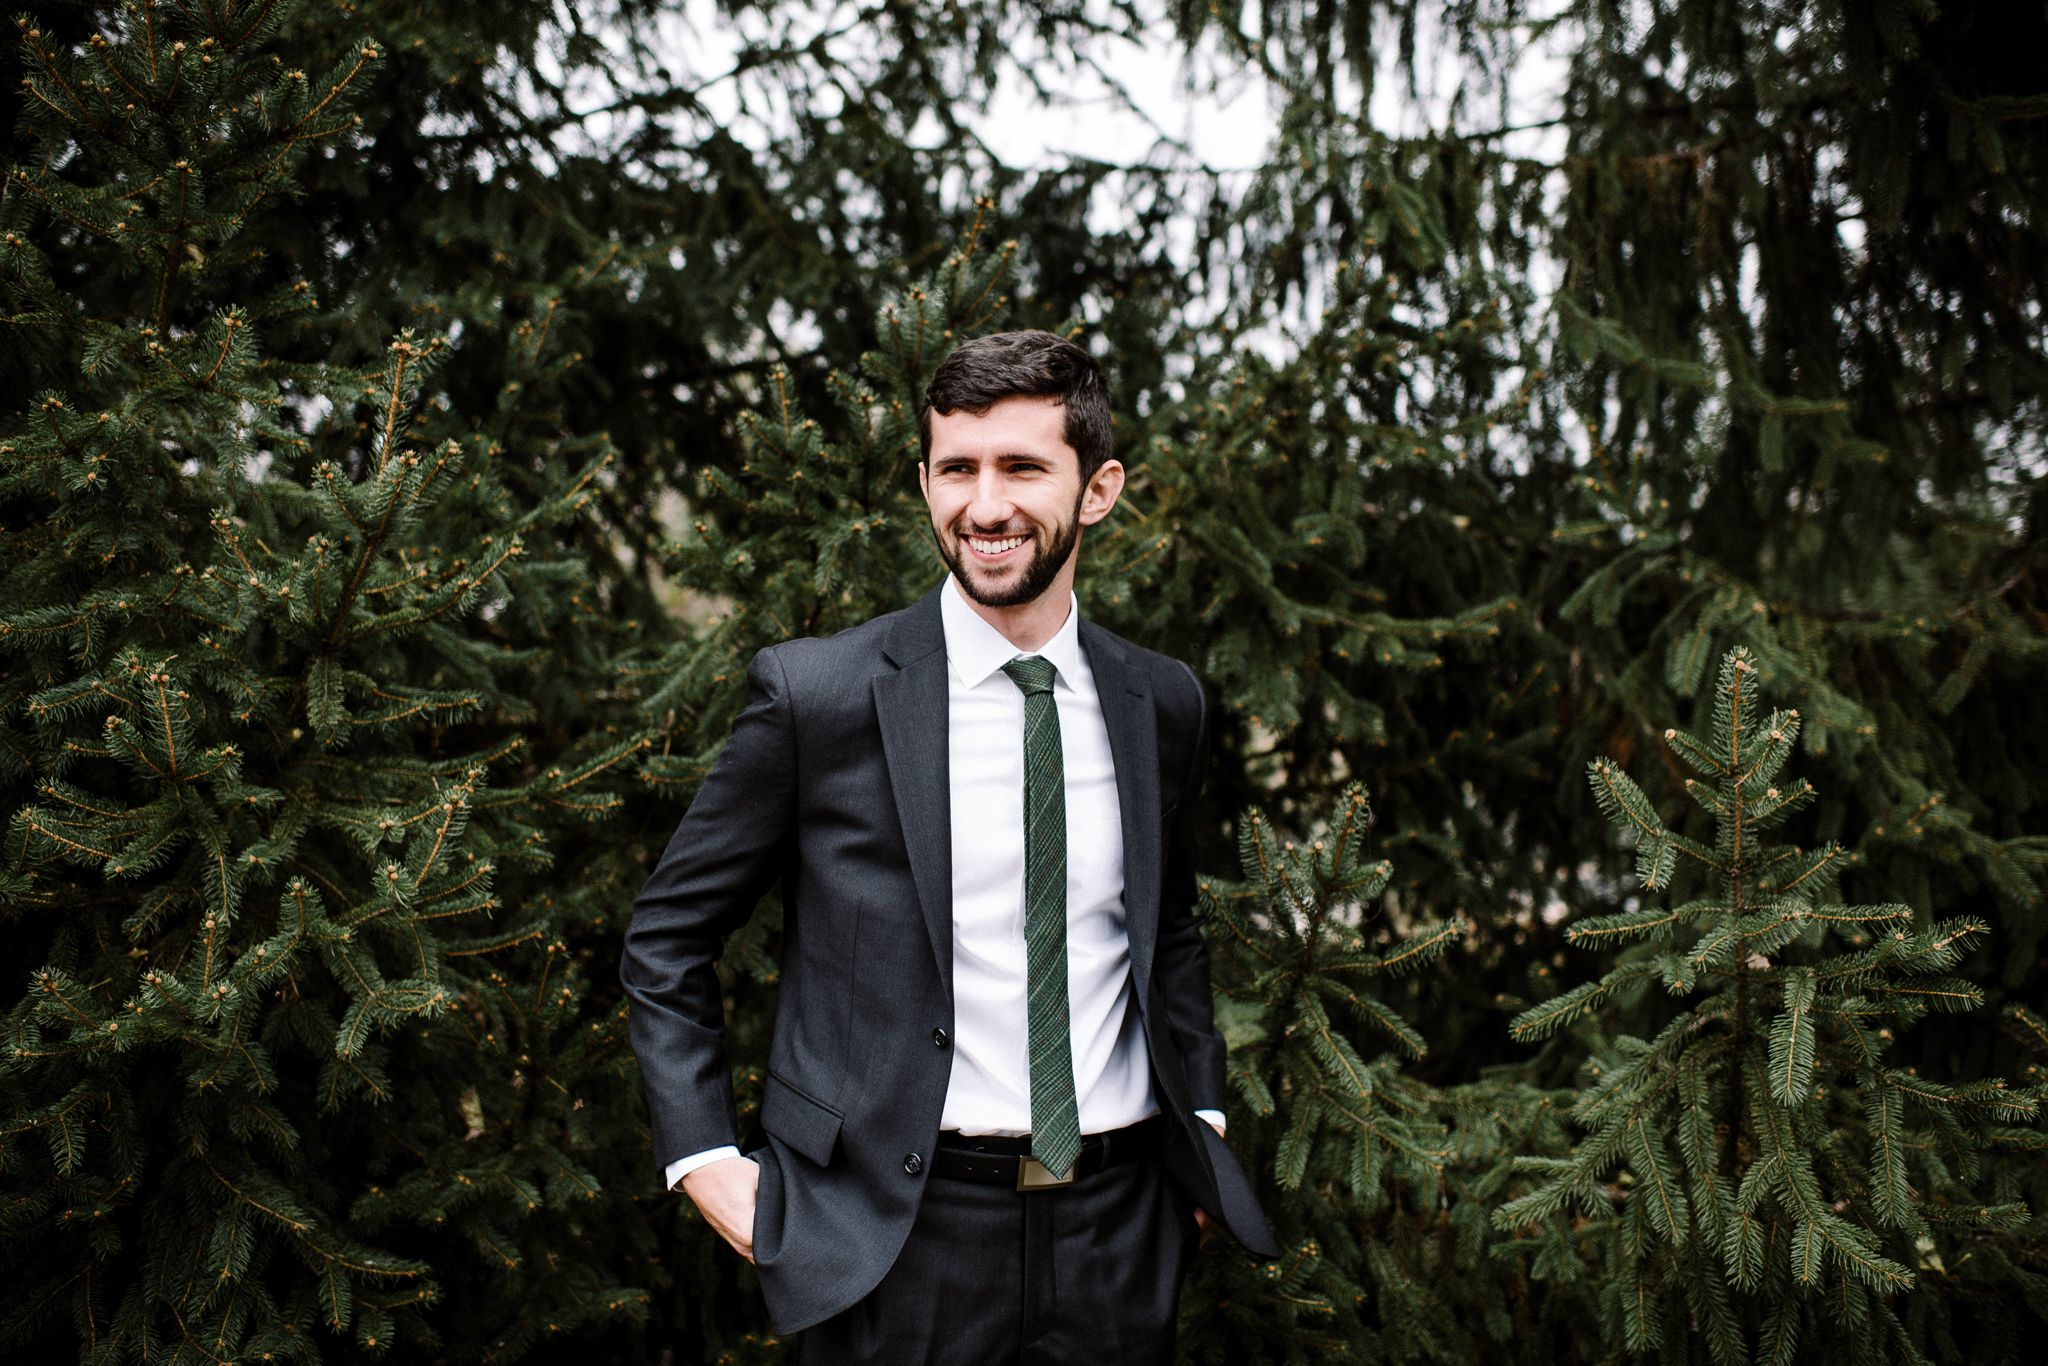 A portrait of a groom in front of pine trees.